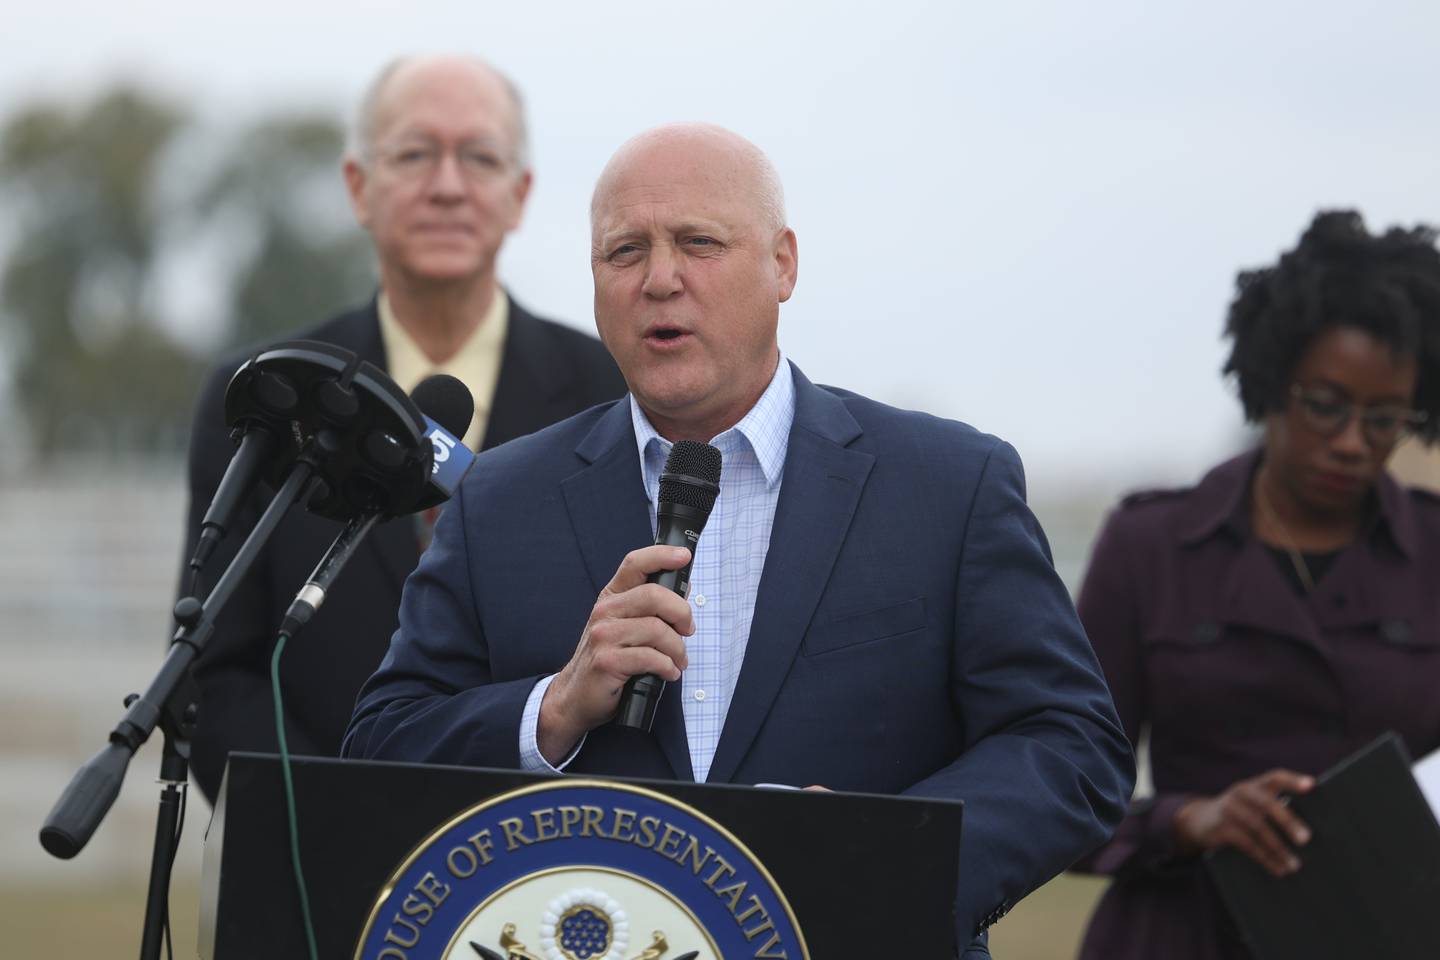 Senior Advisor to the President and White House Infrastructure Coordinator Mitch Landrieu speaks at the press conference announcing new funding from the Bipartisan Infrastructure Law for the state of Illinois at the City of Joliet Aux Sable Wastewater Treatment Plant on Tuesday.